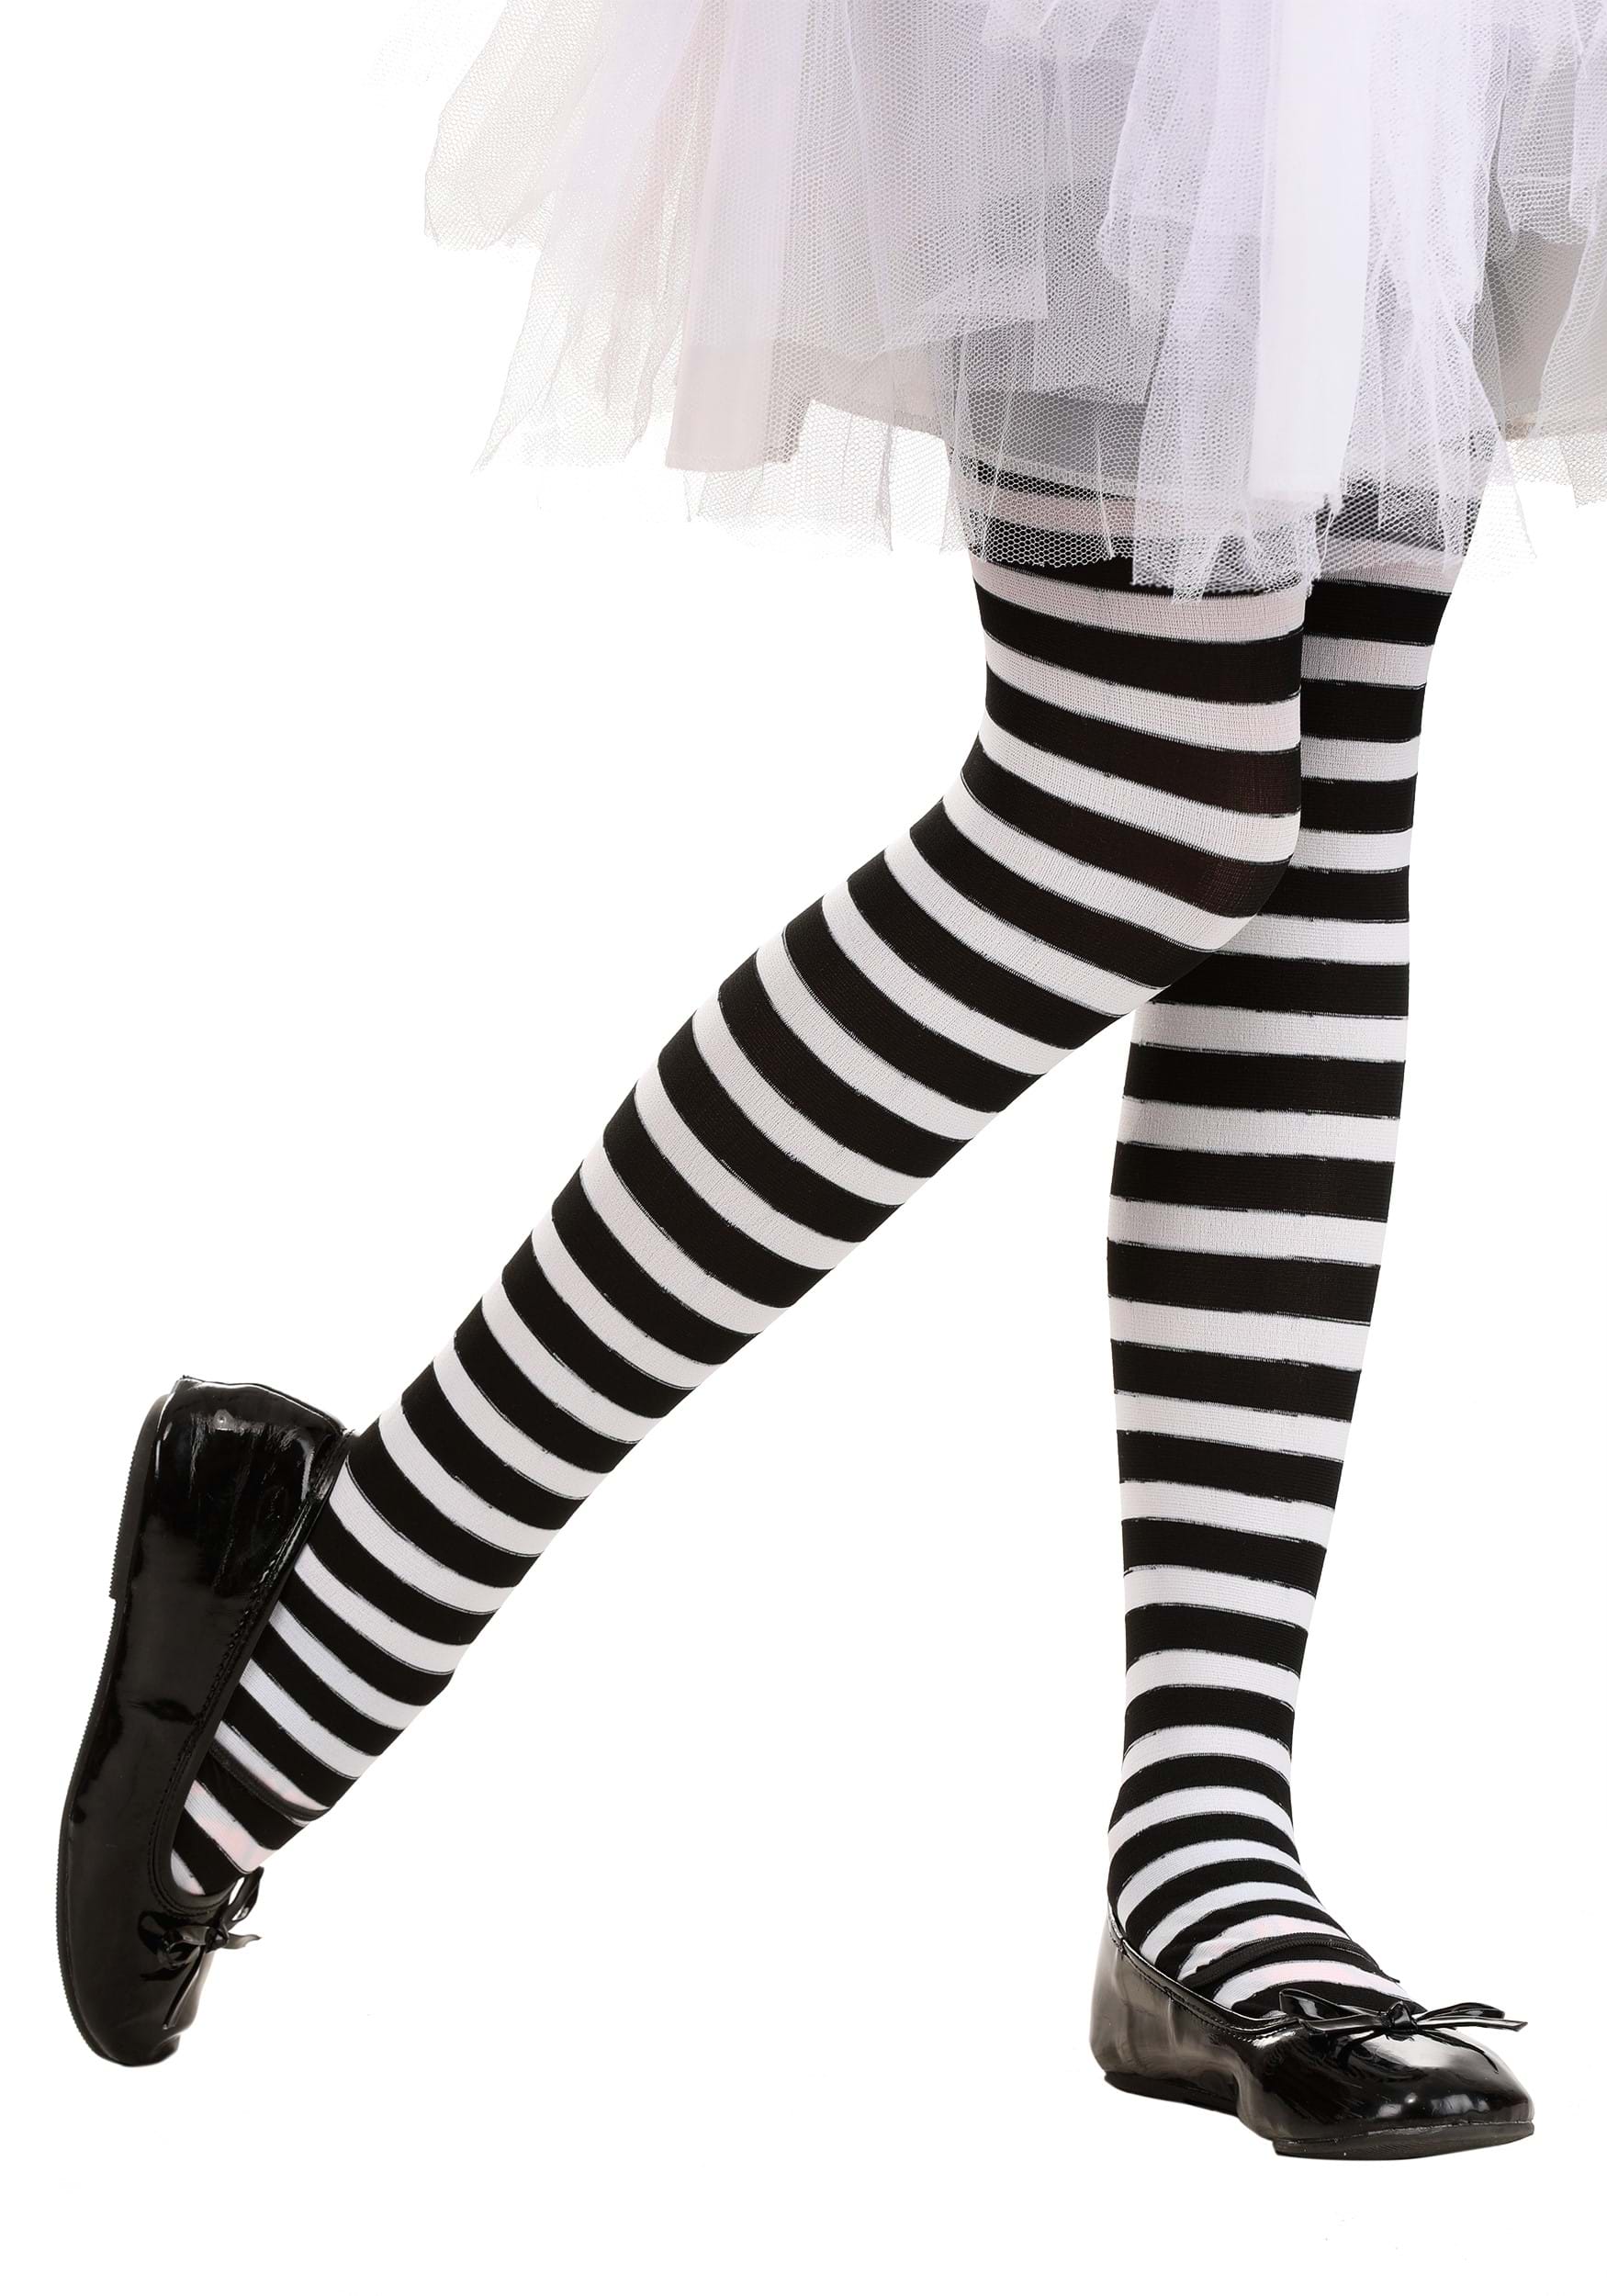 https://images.halloweencostumes.com/products/89971/1-1/child-black-white-striped-tights.jpg